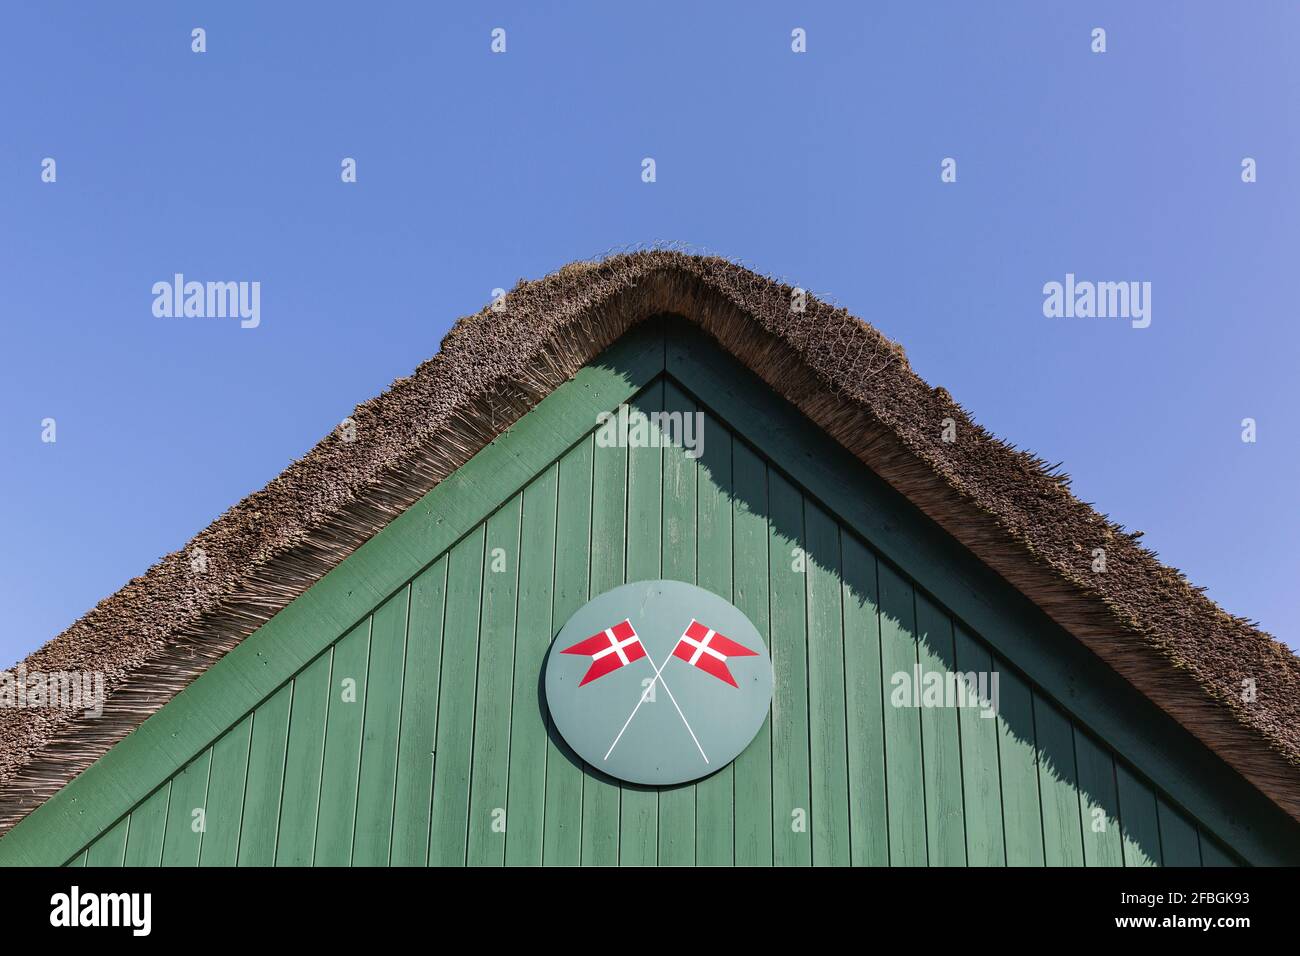 Denmark, Romo, Danish flags painted under thatched roof of fire station Stock Photo